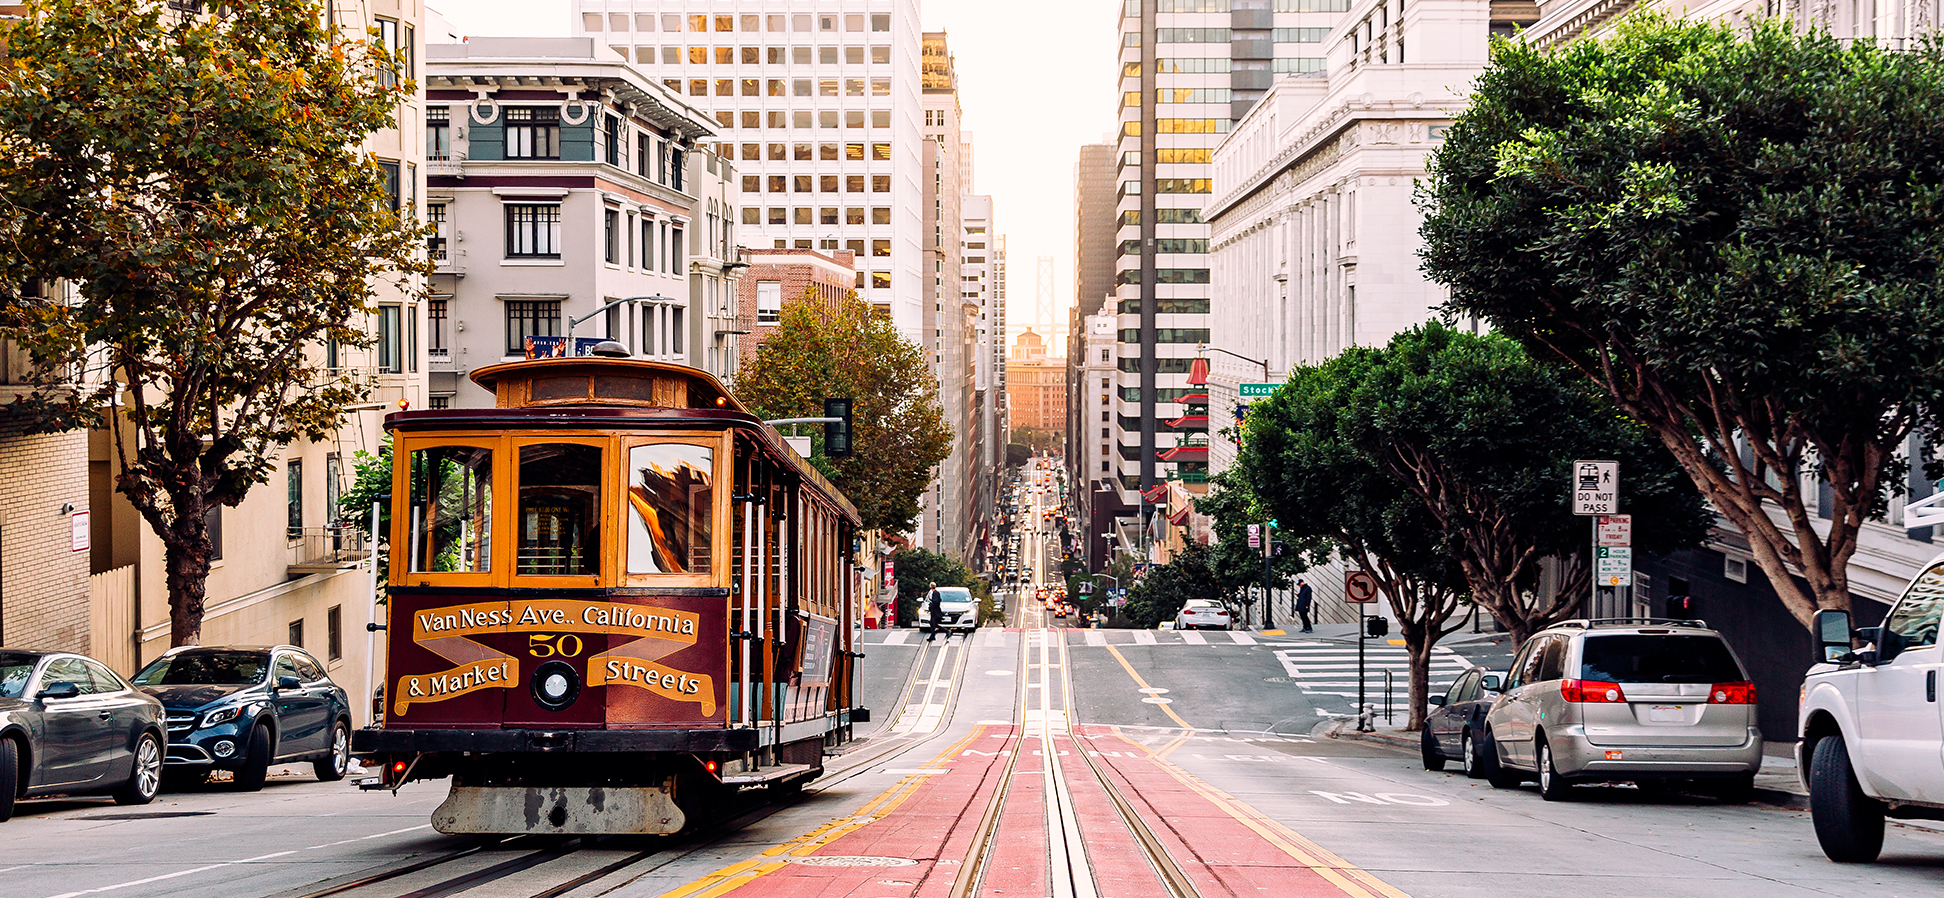 SpotHero Summer Picks: Our Top 7 Things to do in San Francisco this Summer